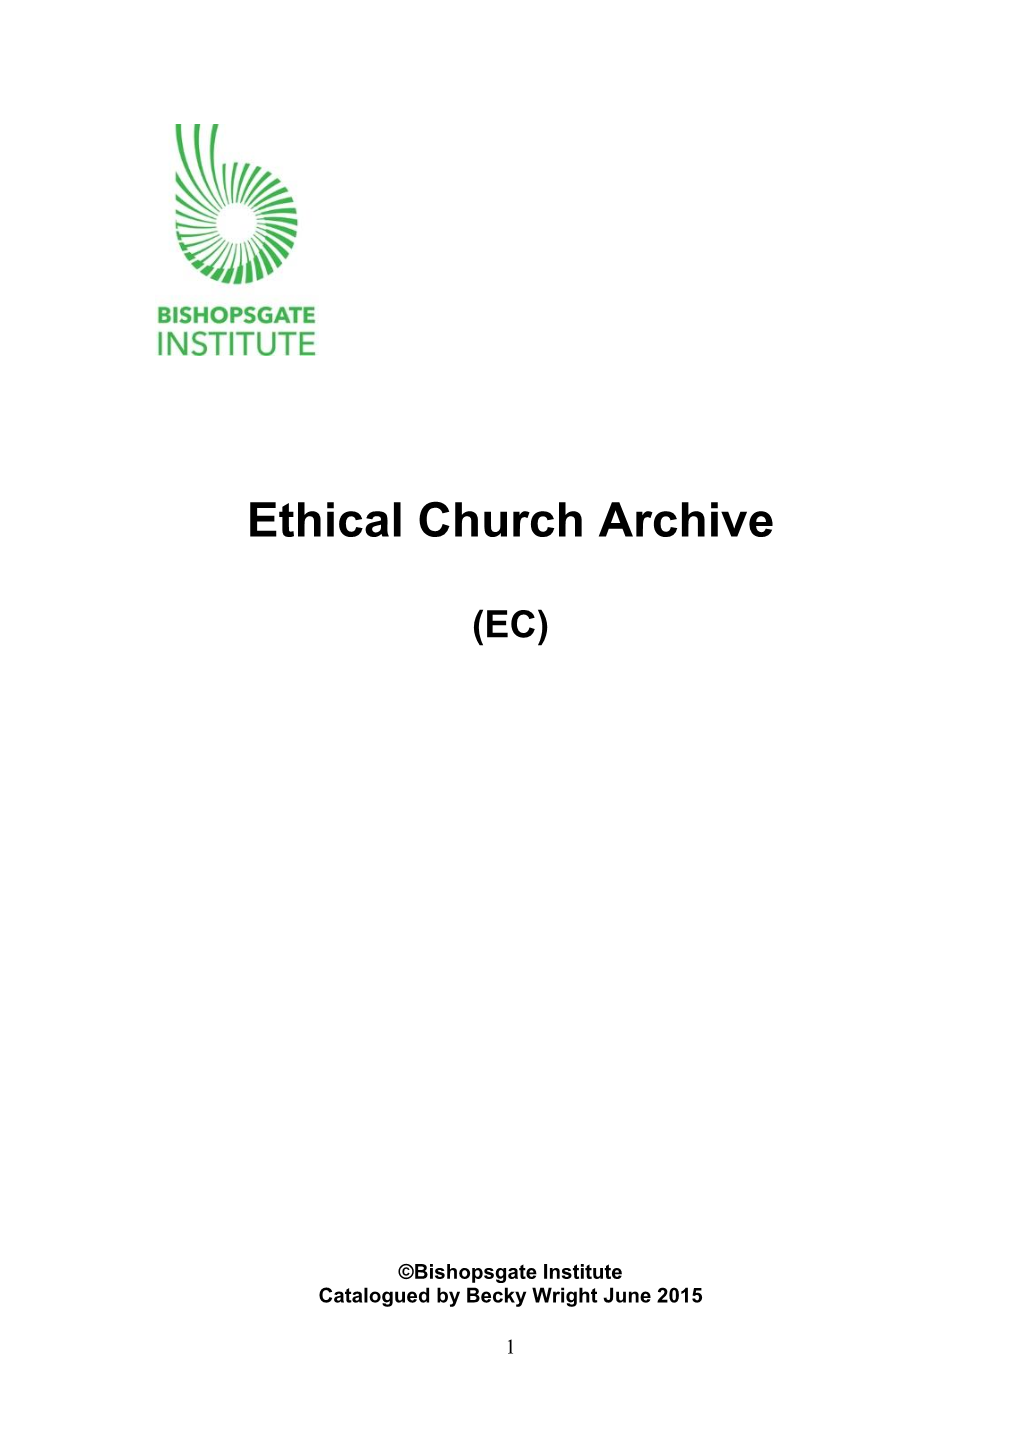 Ethical Church Archive 166 KB